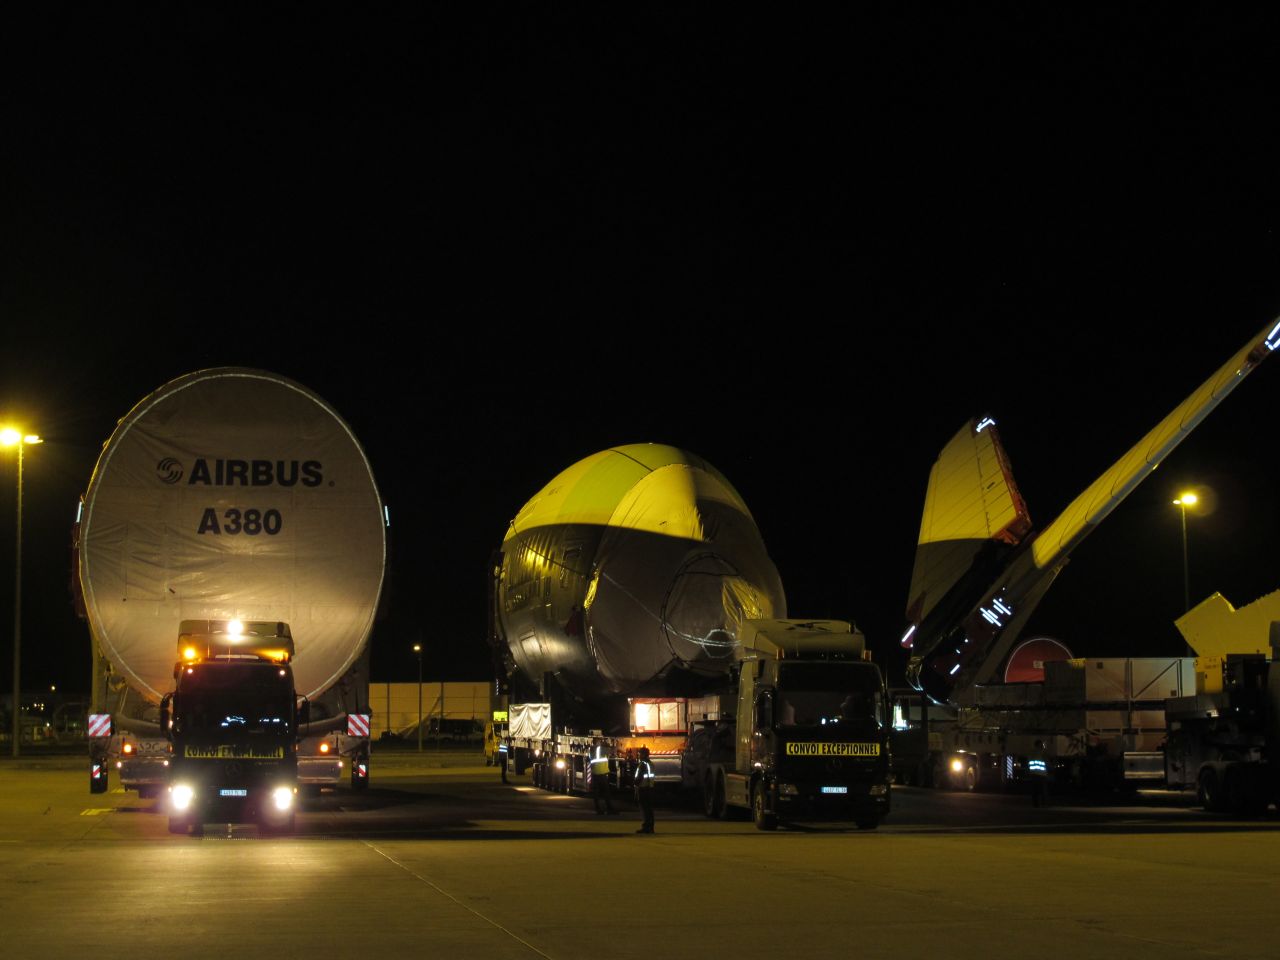 The convoy comes to an end at the French company's production plant. Once assembled the aircraft will be flown to its respective buyer. There are now 89 Airbus A380 planes operated by nine carriers around the world.